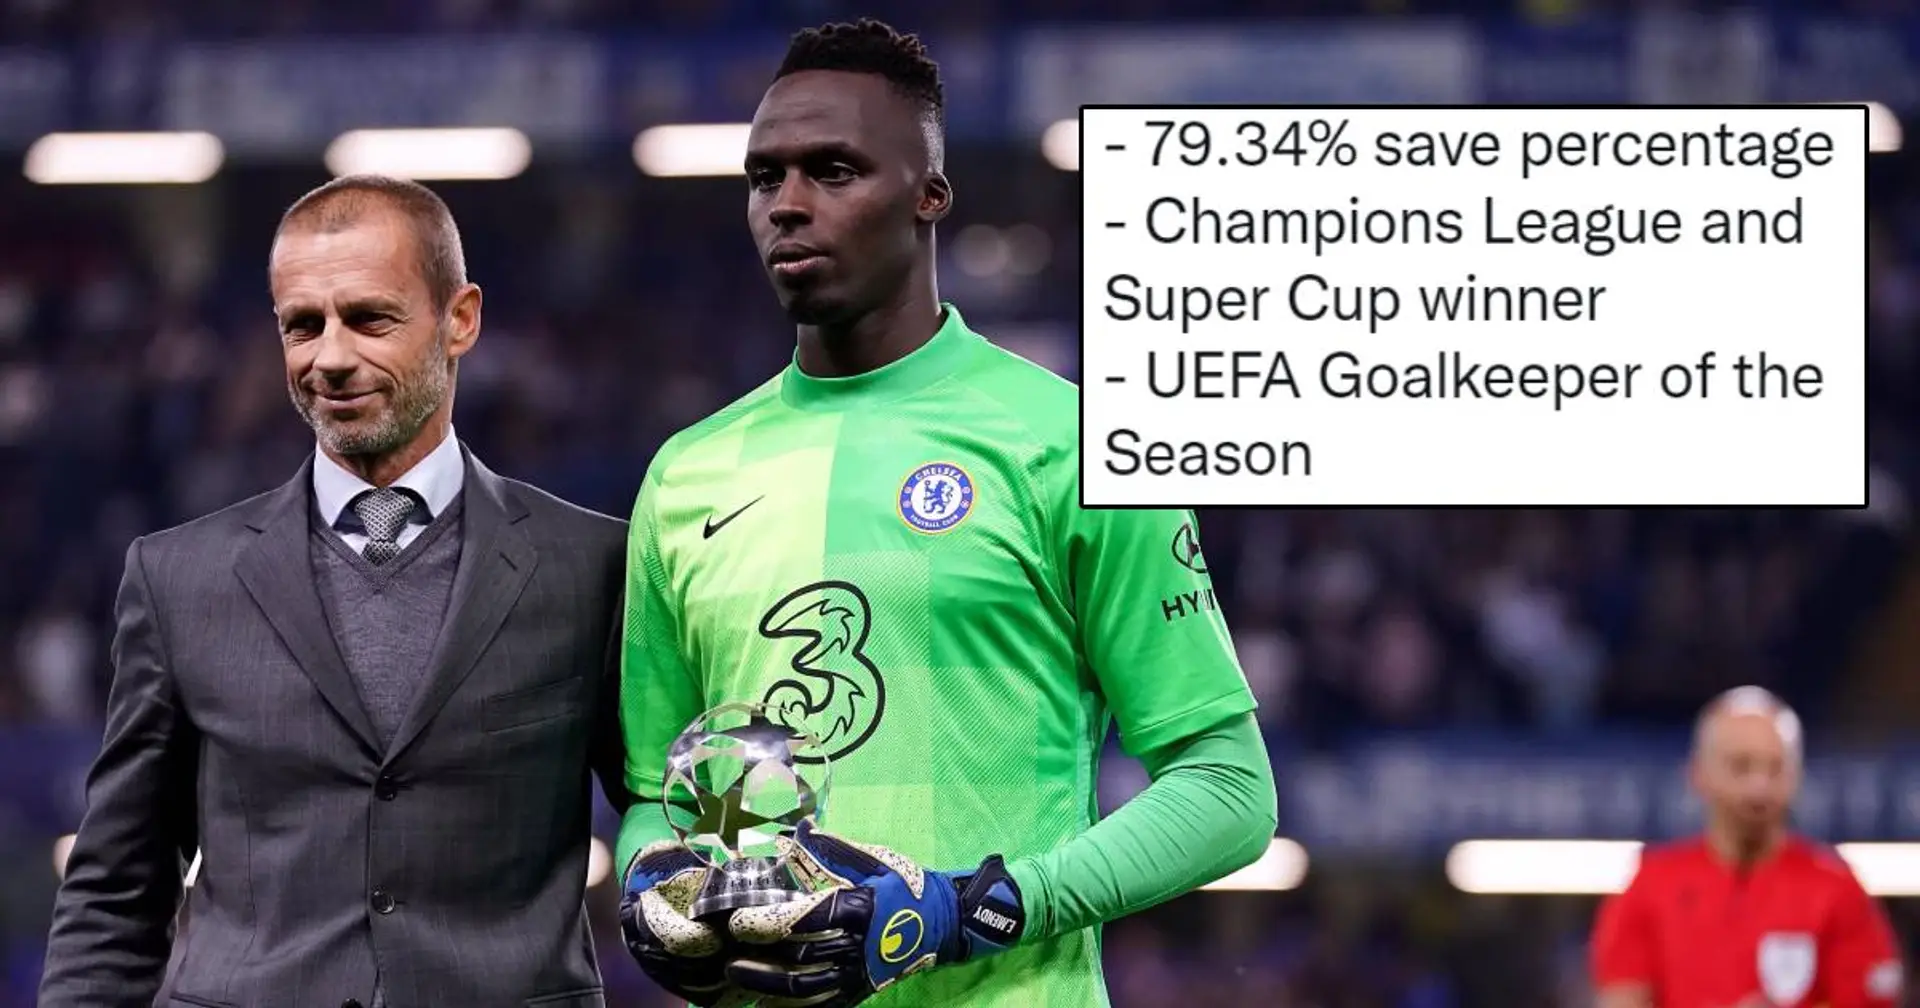 Mendy completes 50 appearances with Chelsea: Taking closer look at his superb Blues career 